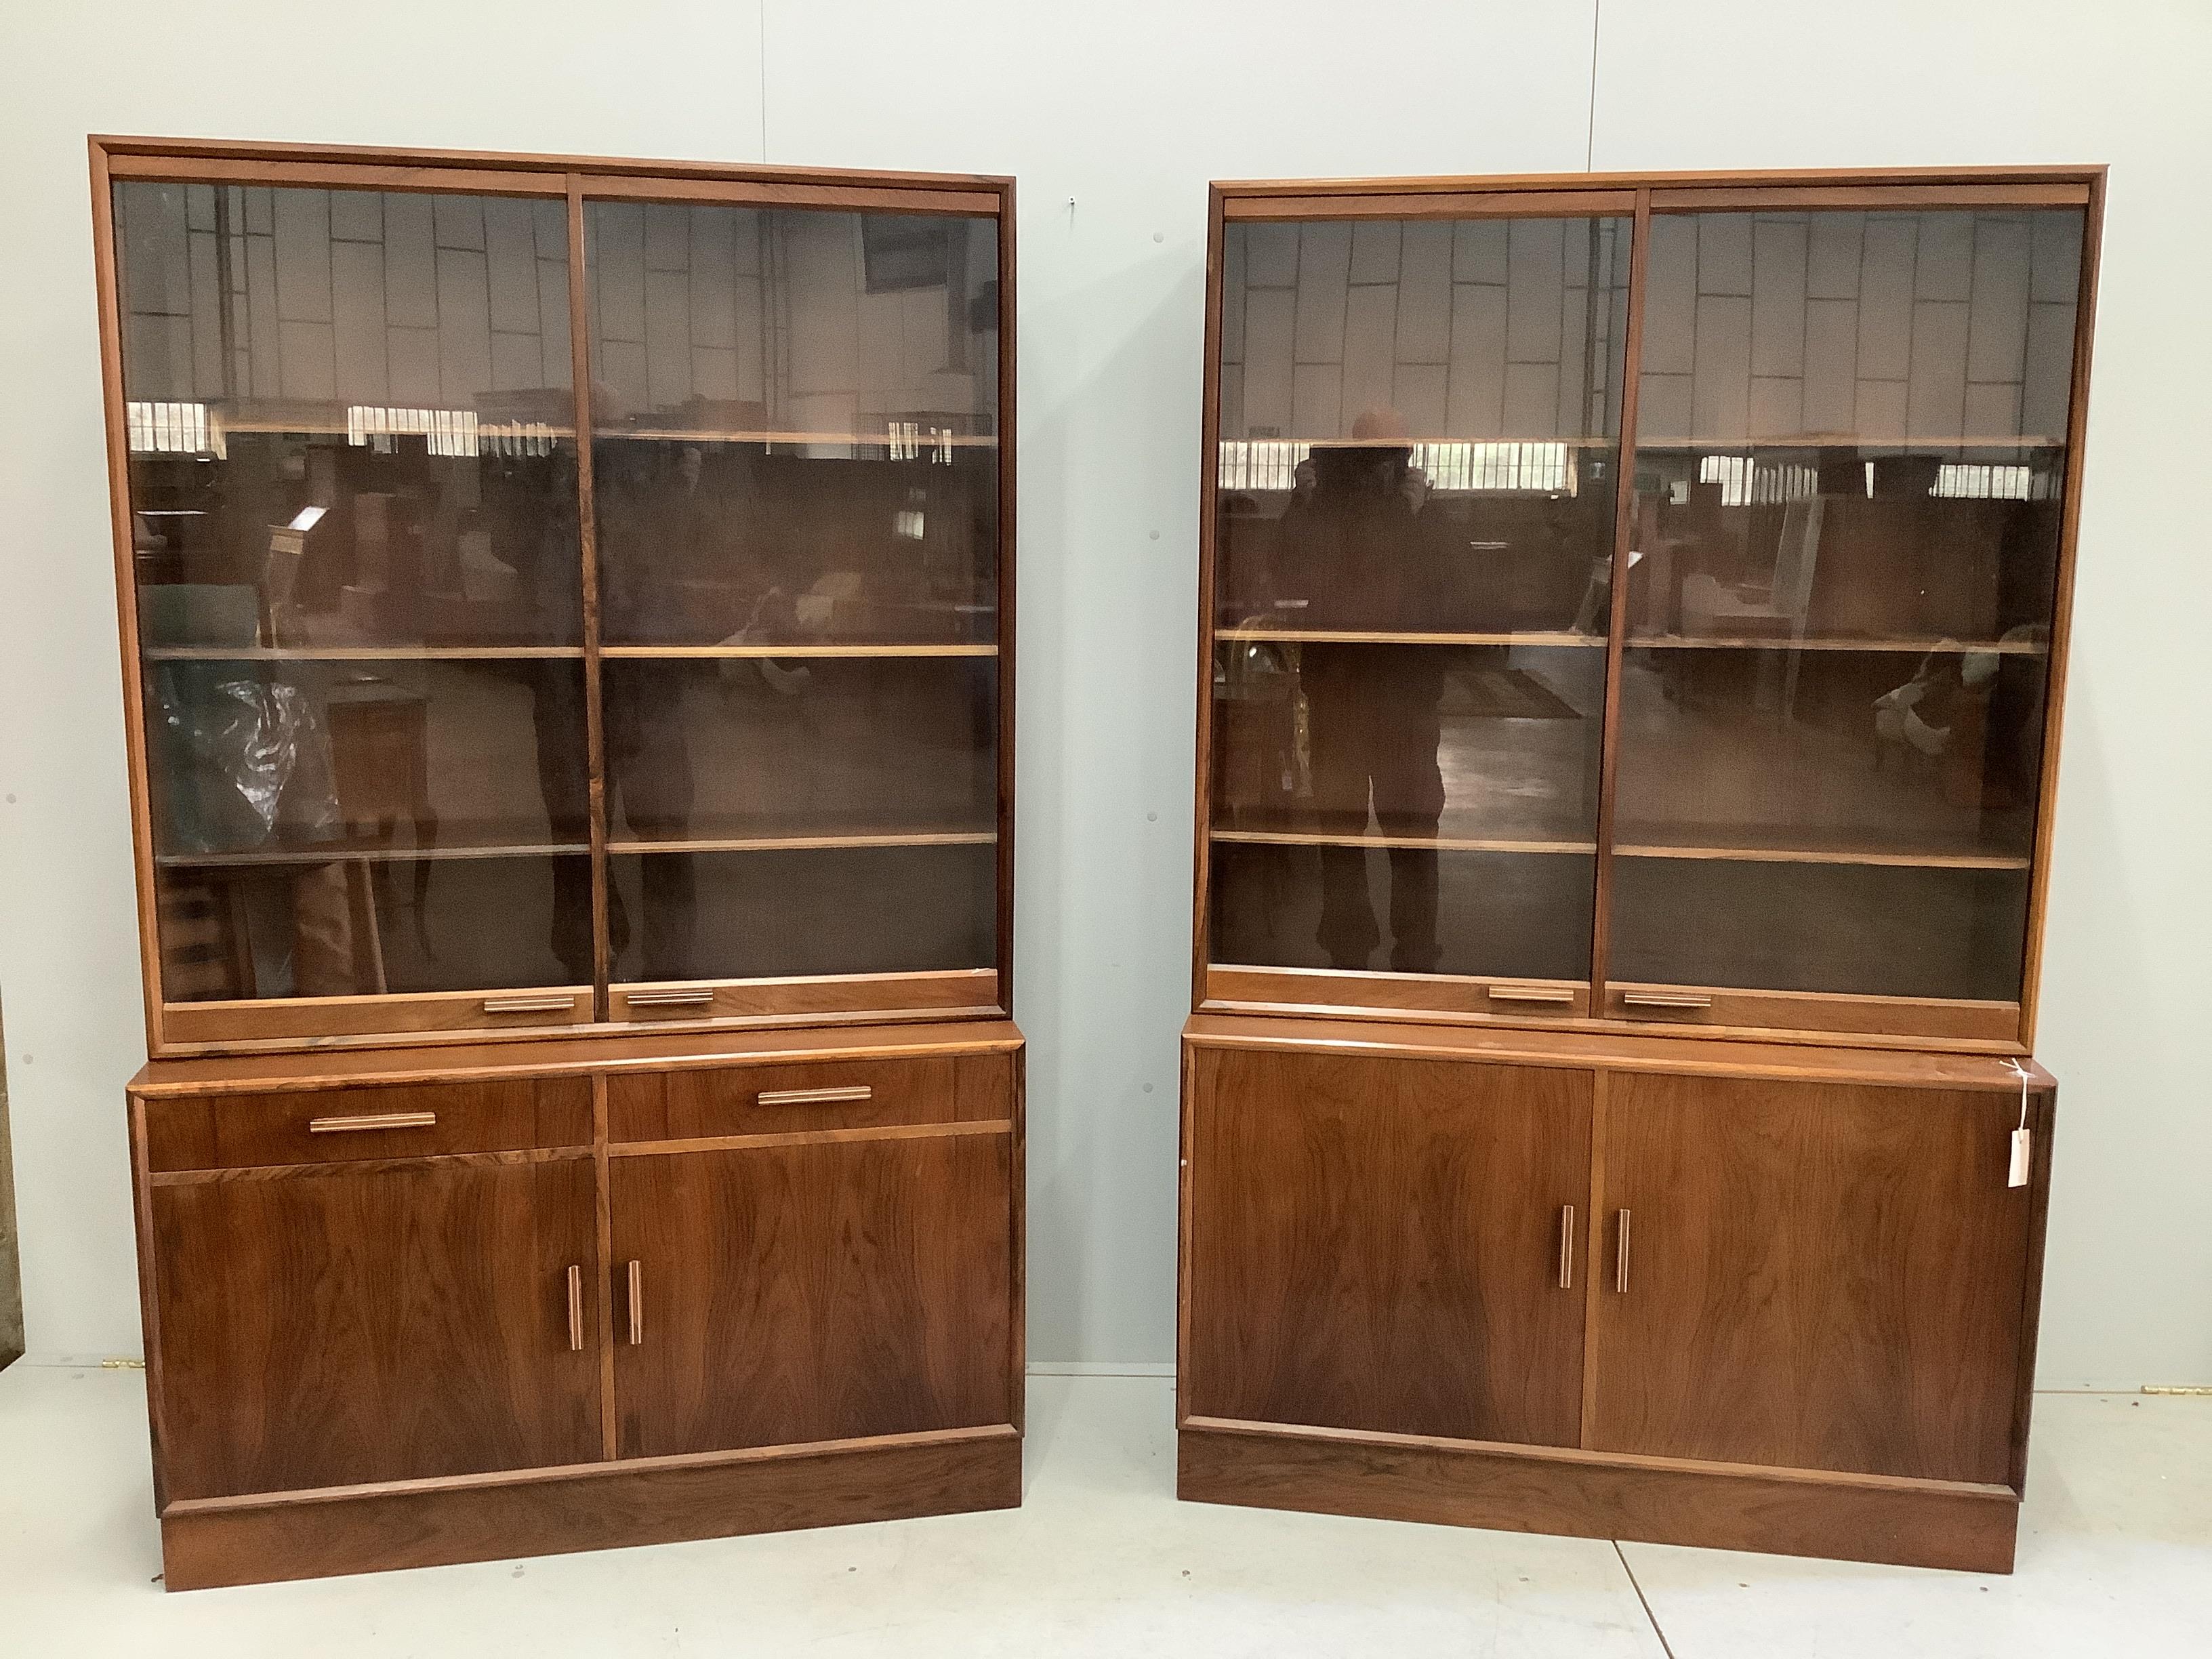 A pair of mid century Indian rosewood glazed cabinets with adjustable shelves, width 110cm, depth 38cm, height 180cm